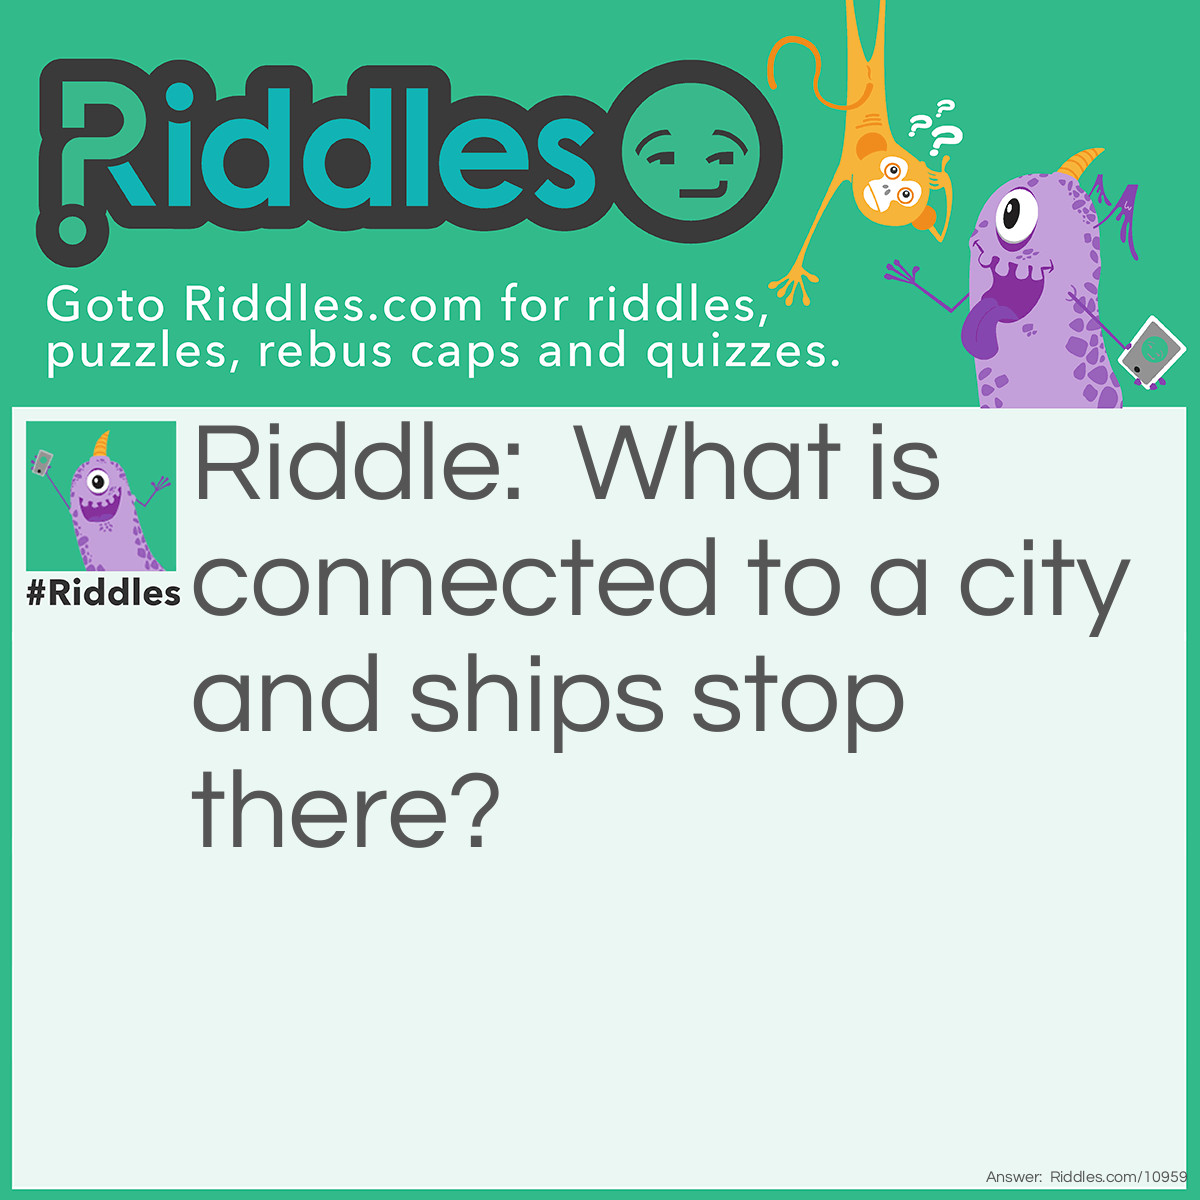 Riddle: What is connected to a city and ships stop there? Answer: A dock.